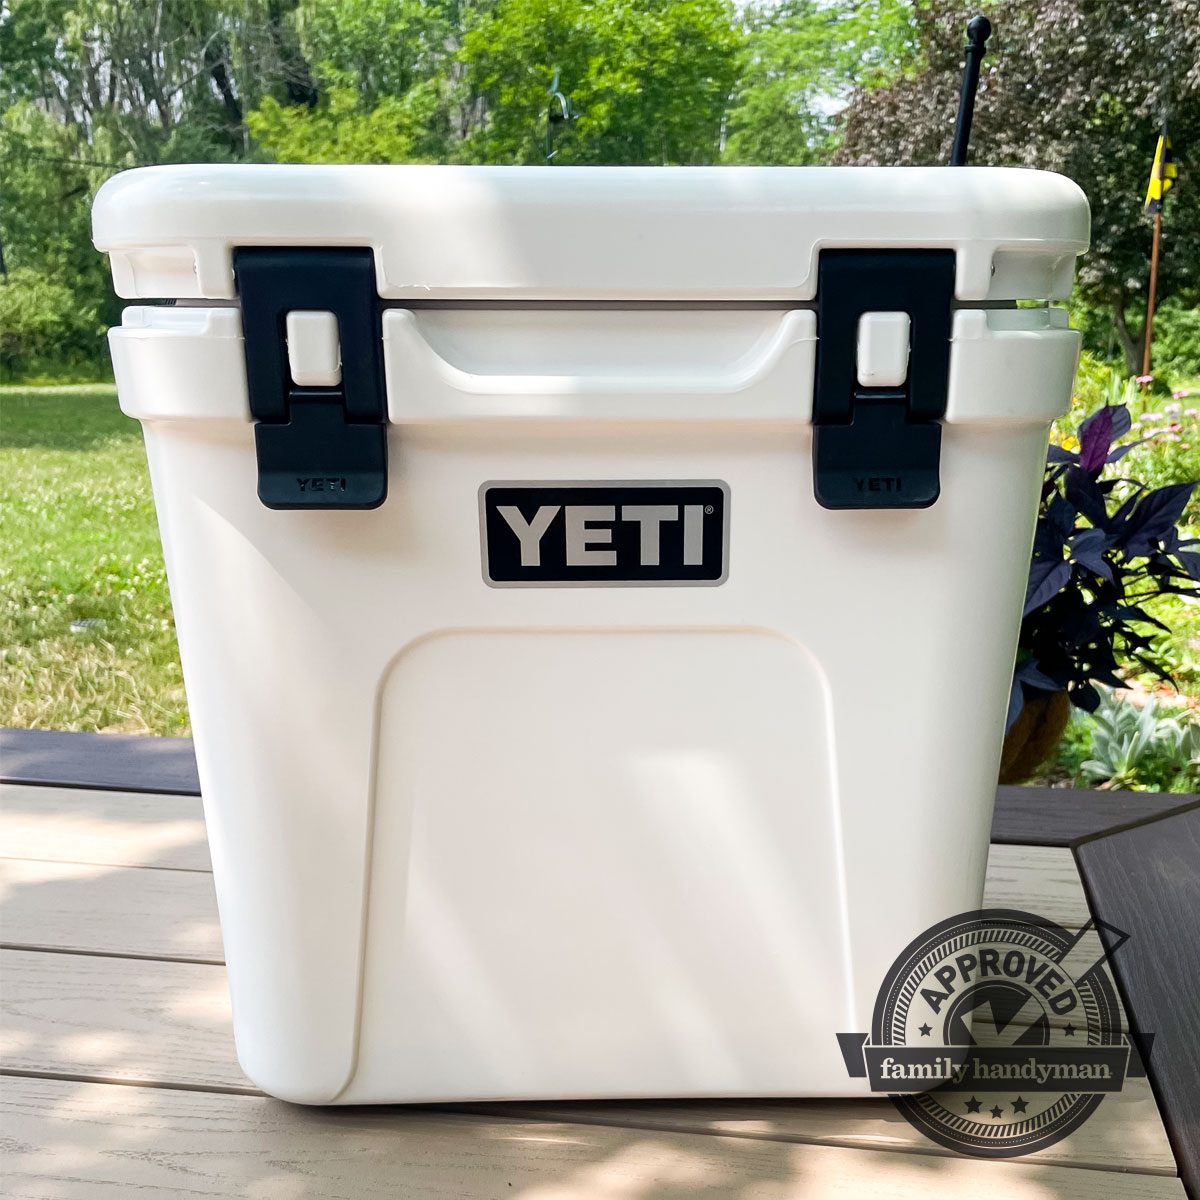 9 Best Yeti Products Our Editors Tested and Loved